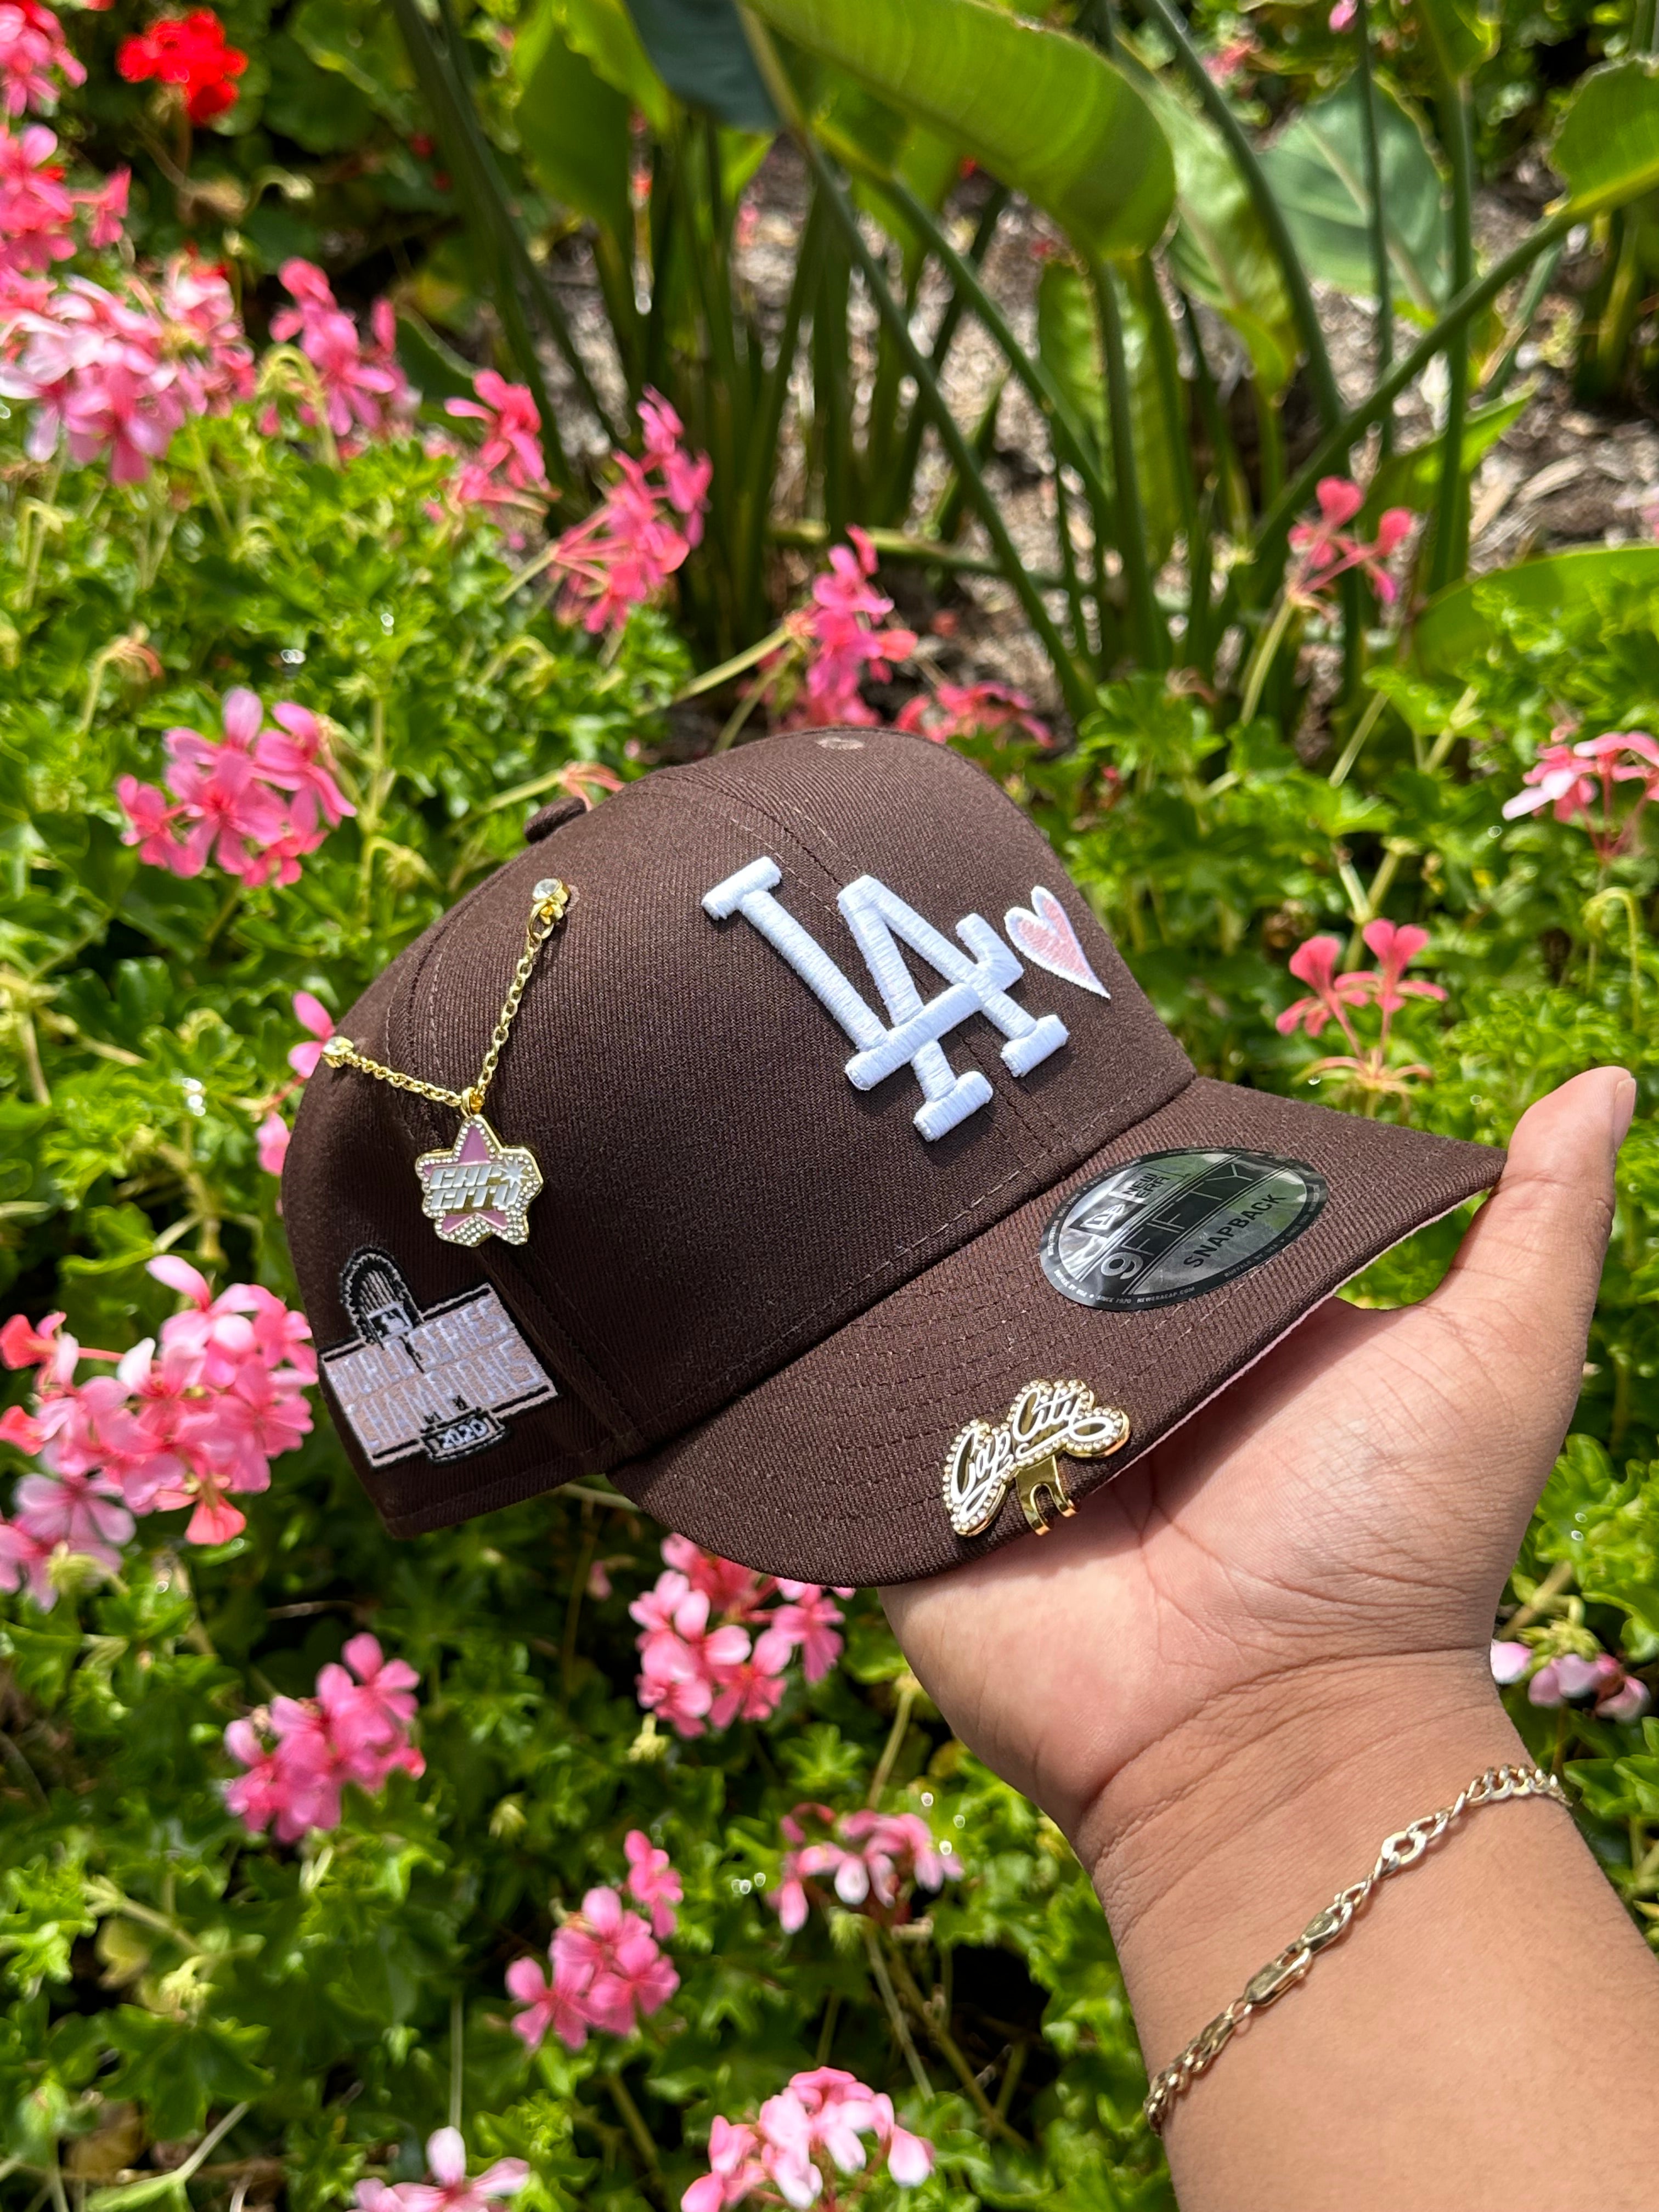 NEW ERA EXCLUSIVE 9FIFTY BURNT WOOD LOS ANGELES DODGERS SNAPBACK W/ PINK HEART + 2020 WS CHAMPIONS SIDE PATCH